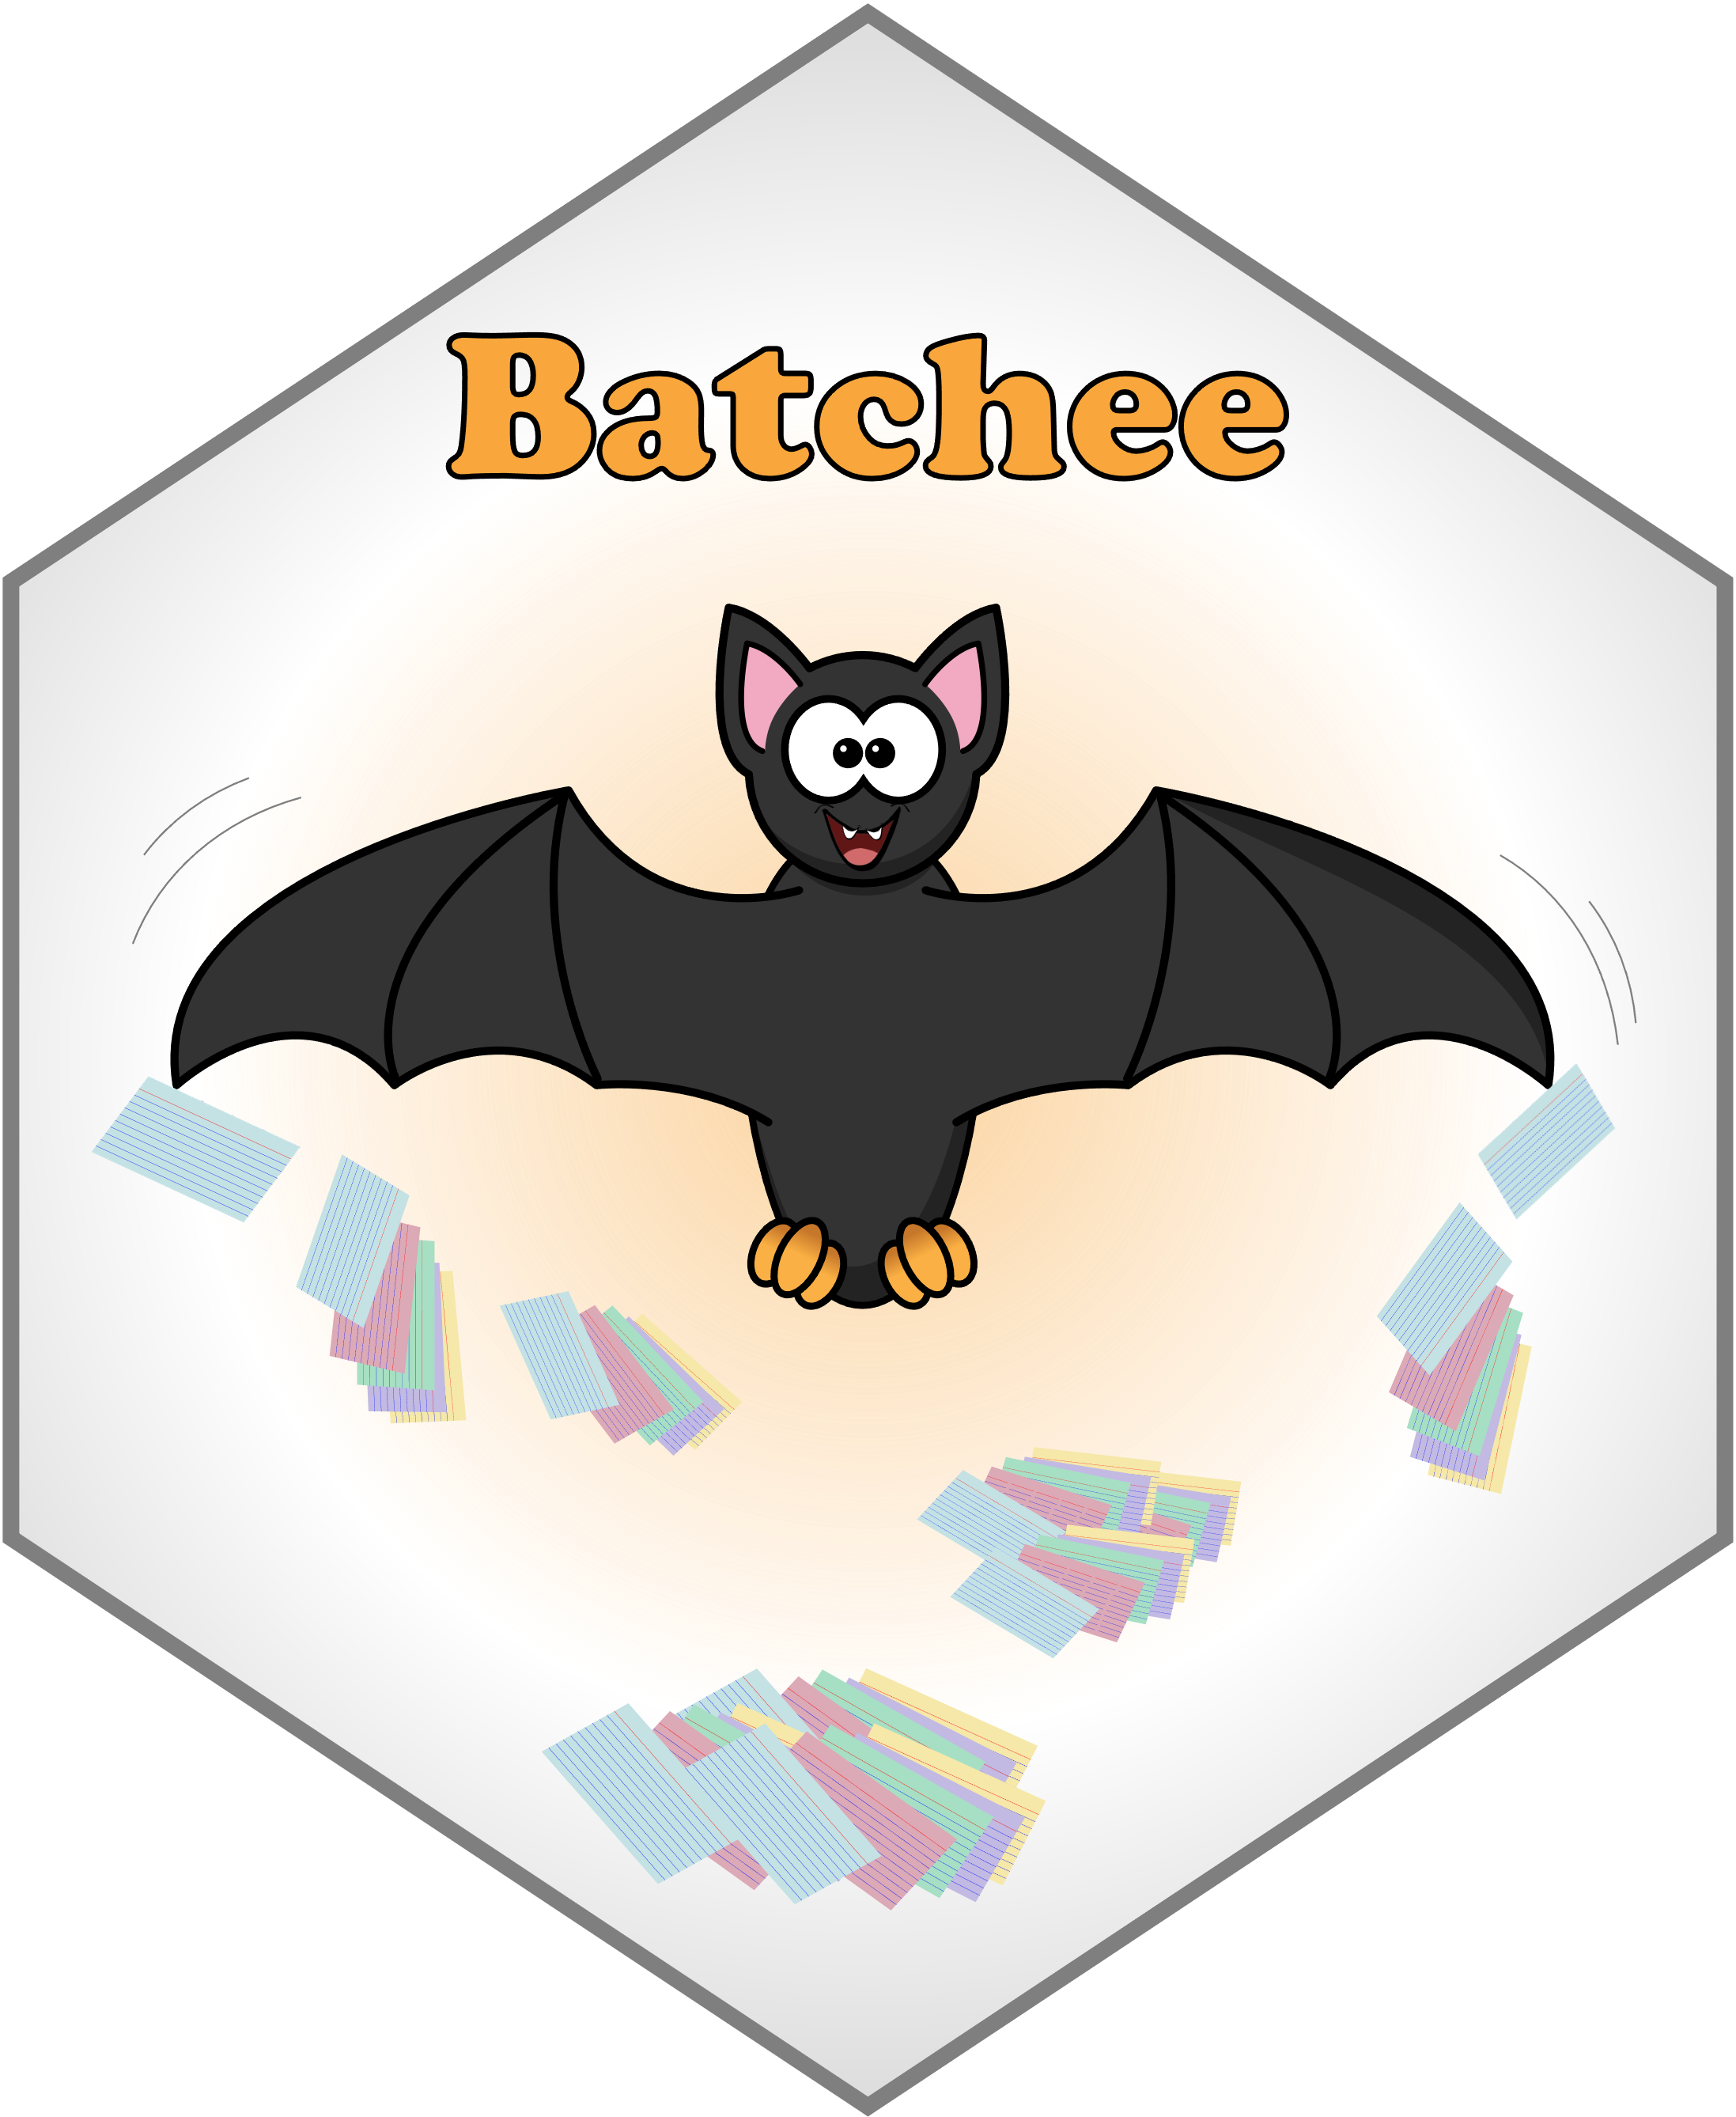 batchee, a python package for grouping together filenames to enable subsequent batched operations (such as concatenation).